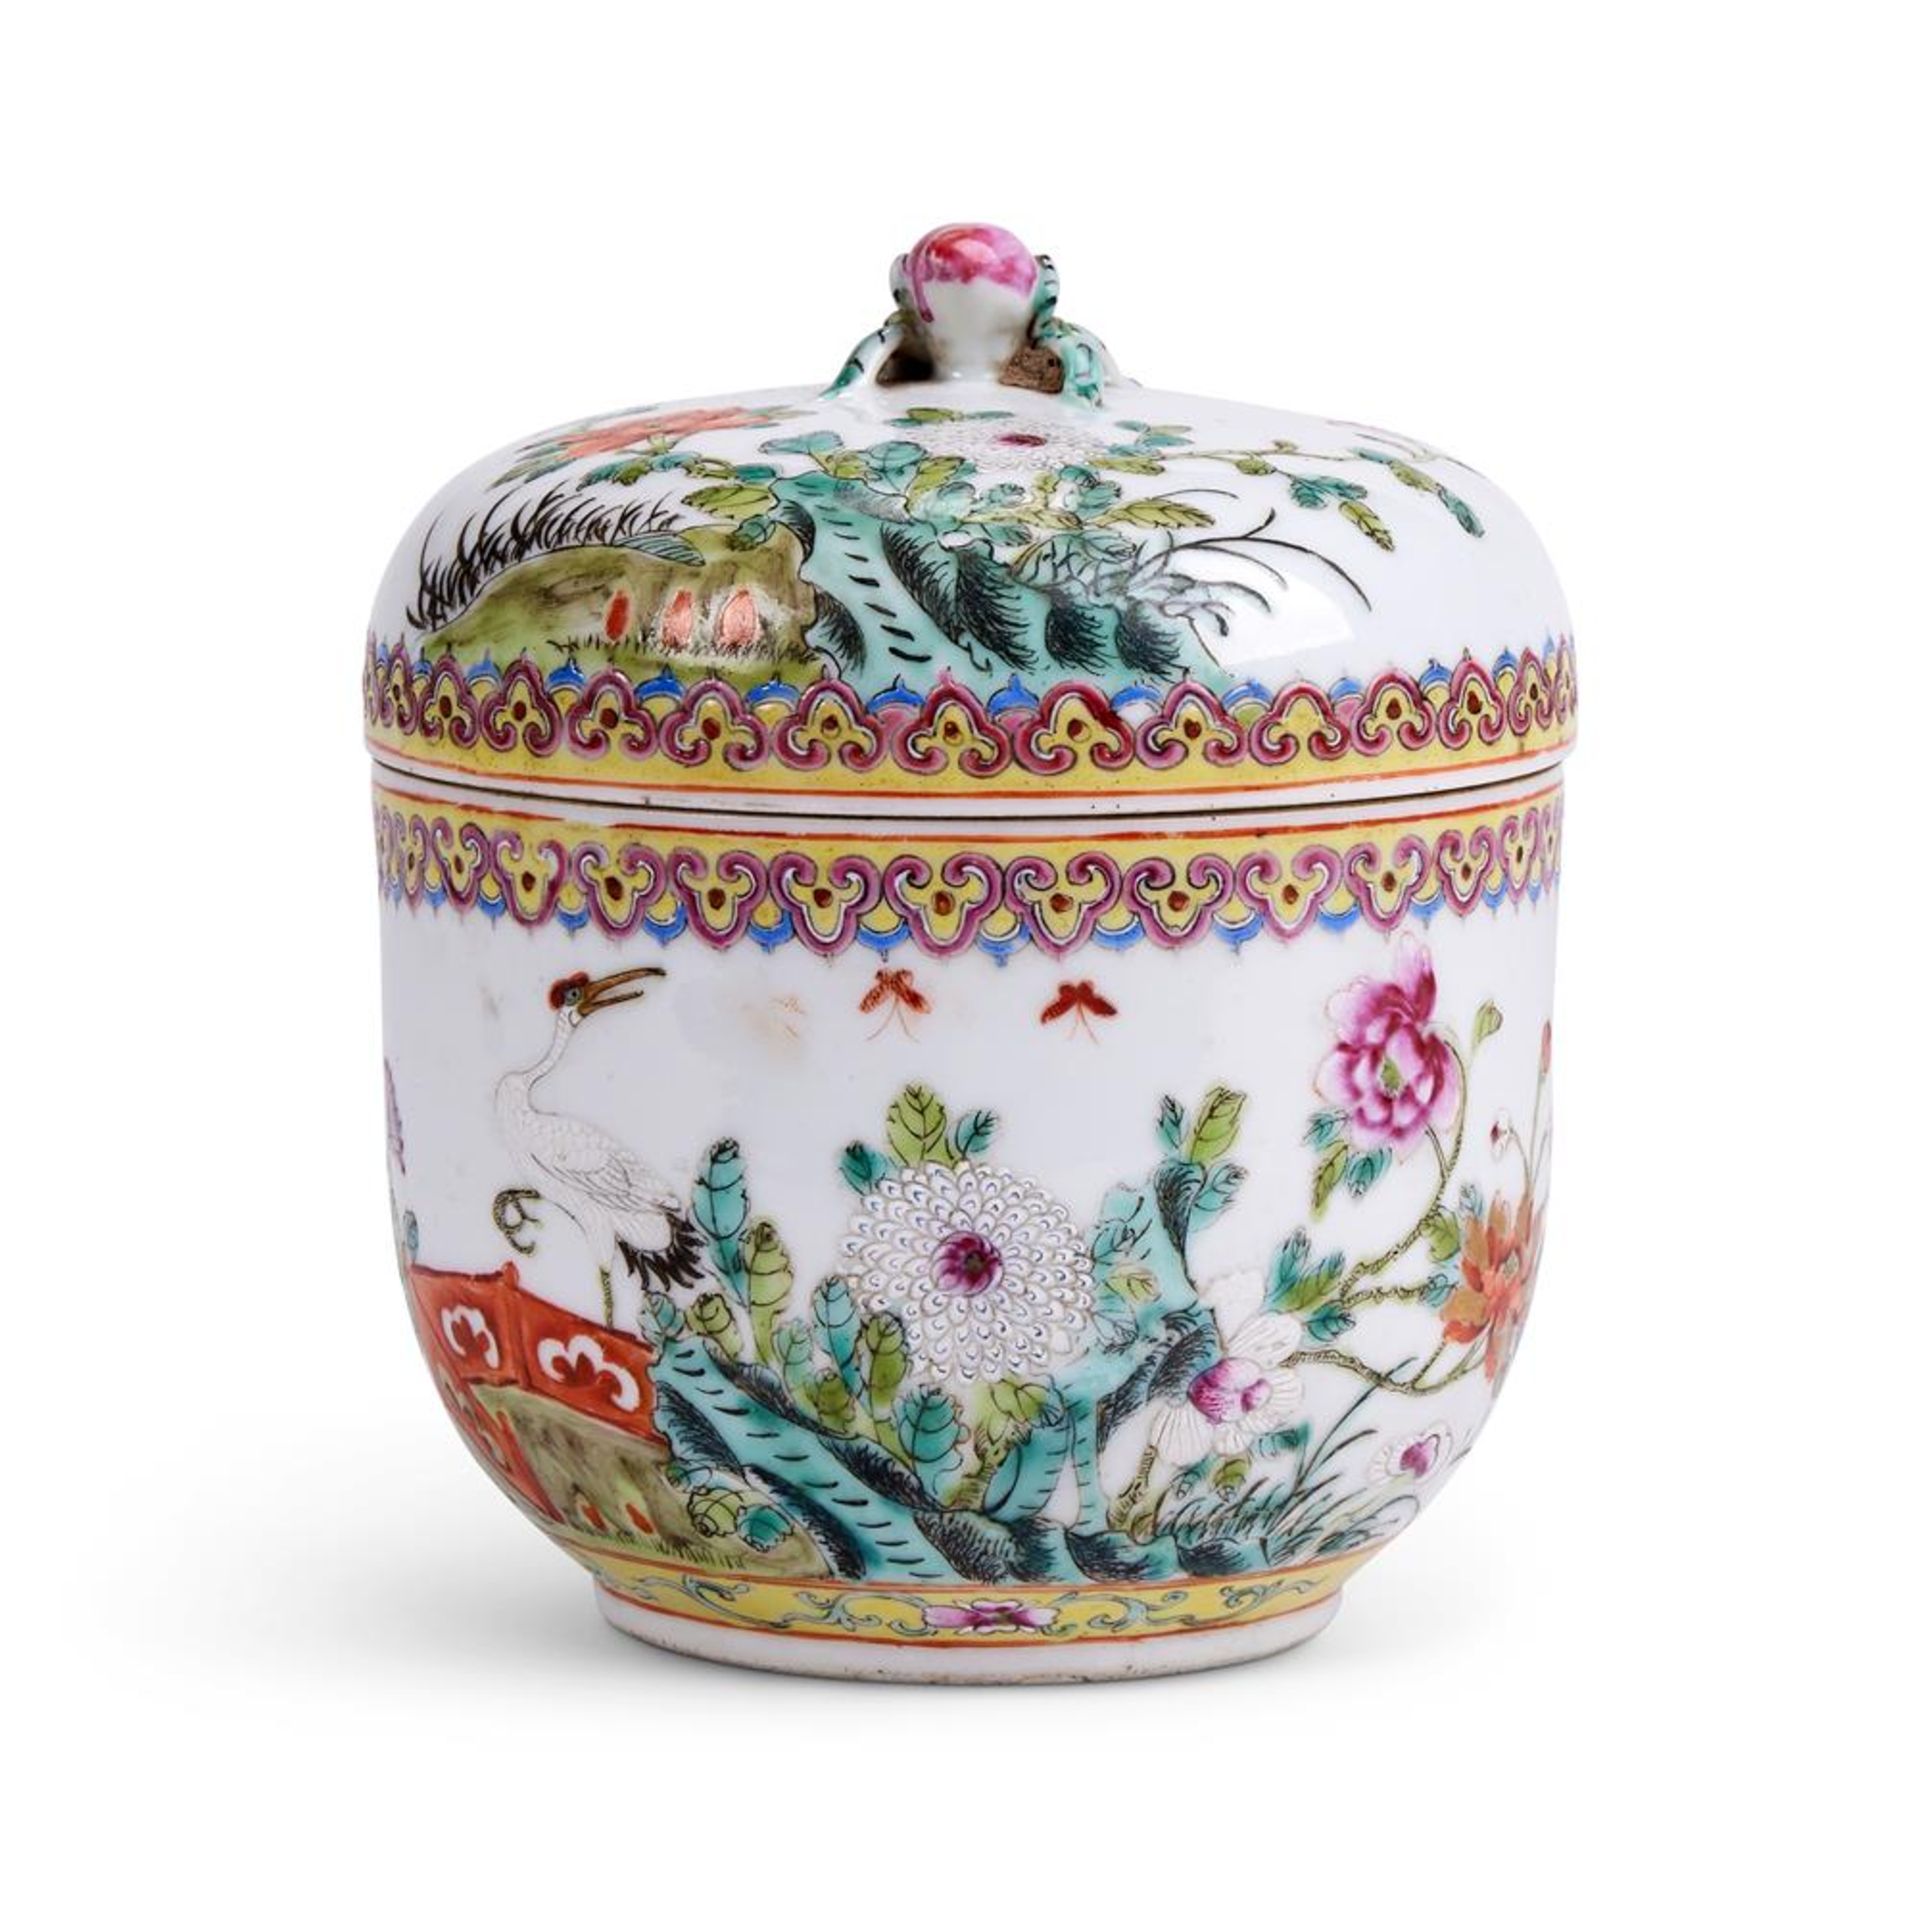 A CHINESE PORCELAIN COVERED BOWL, 20TH CENTURY